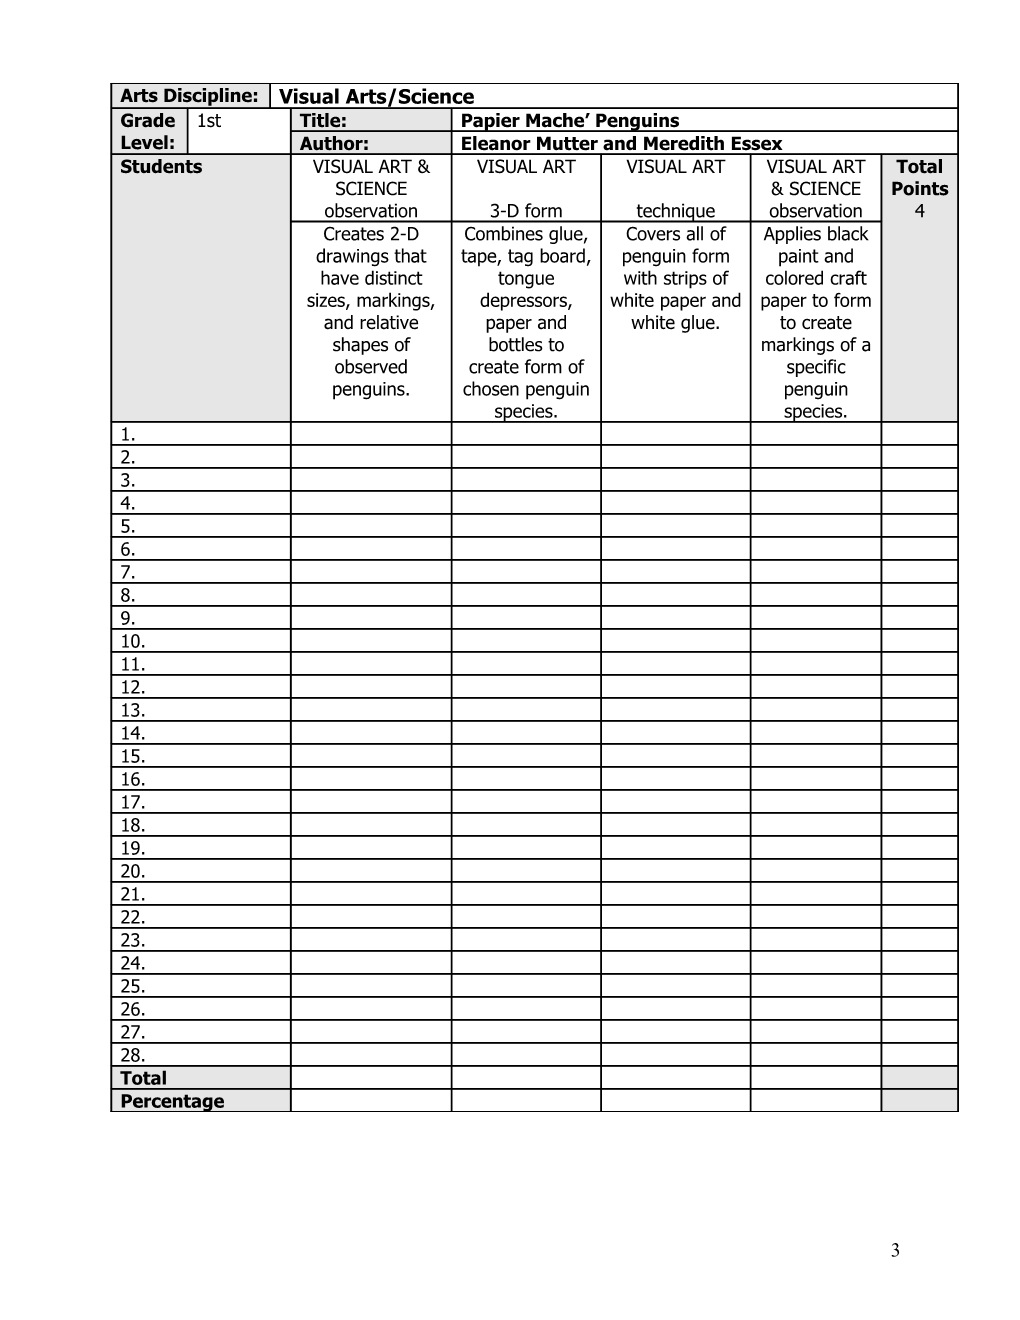 Arts Impact Lesson Planning Format s1